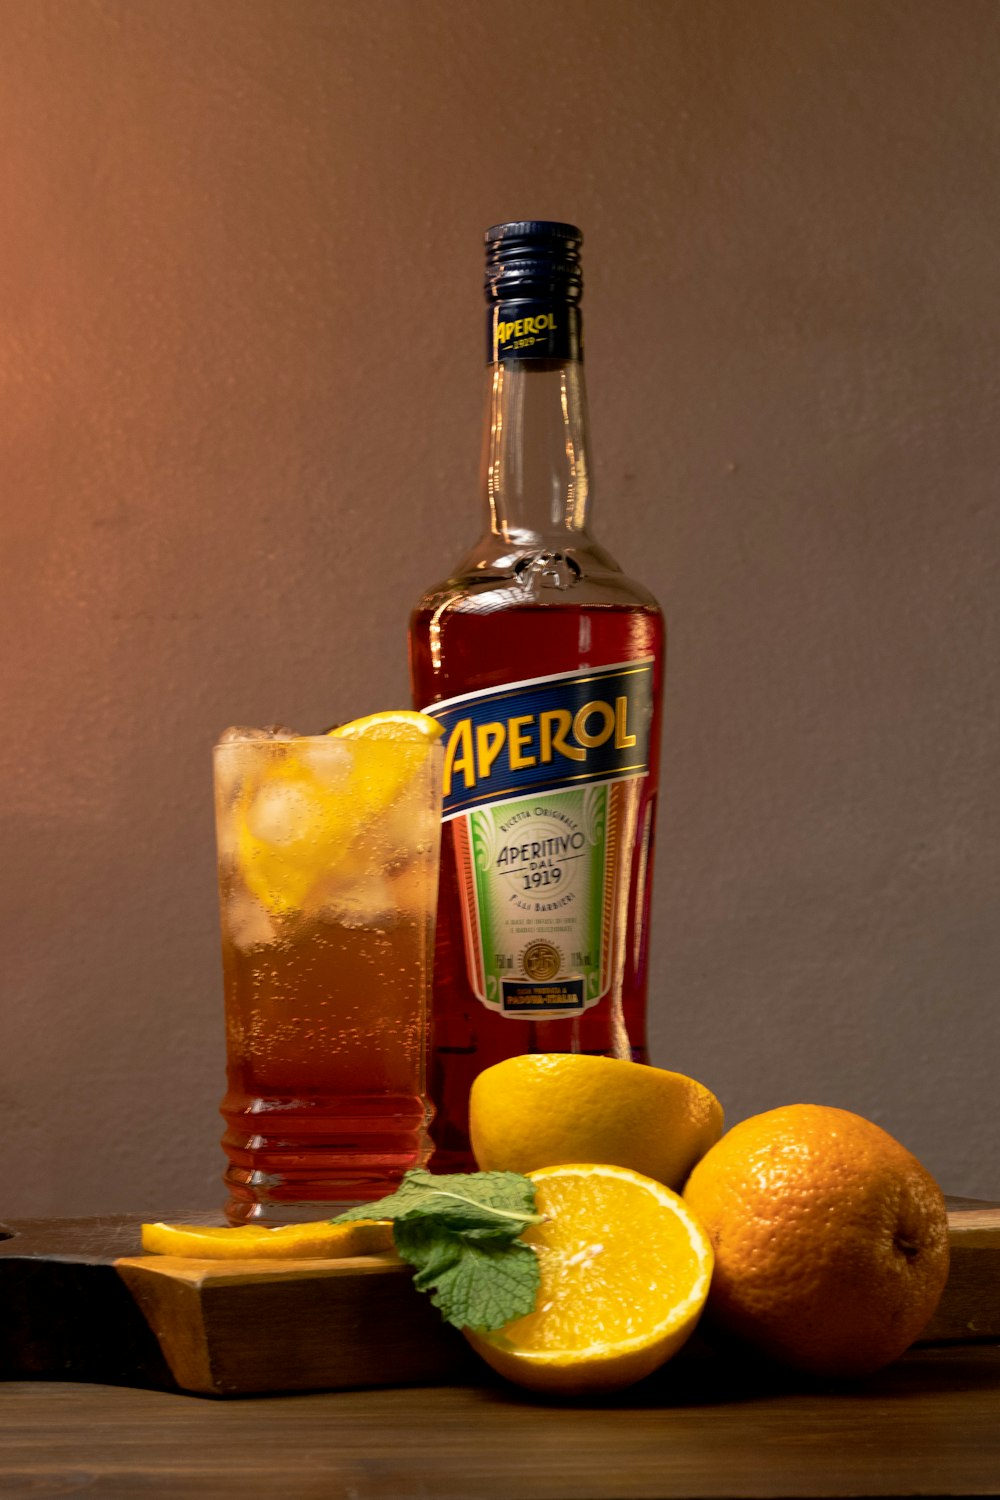 a bottle of aperol next to some lemons and a glass